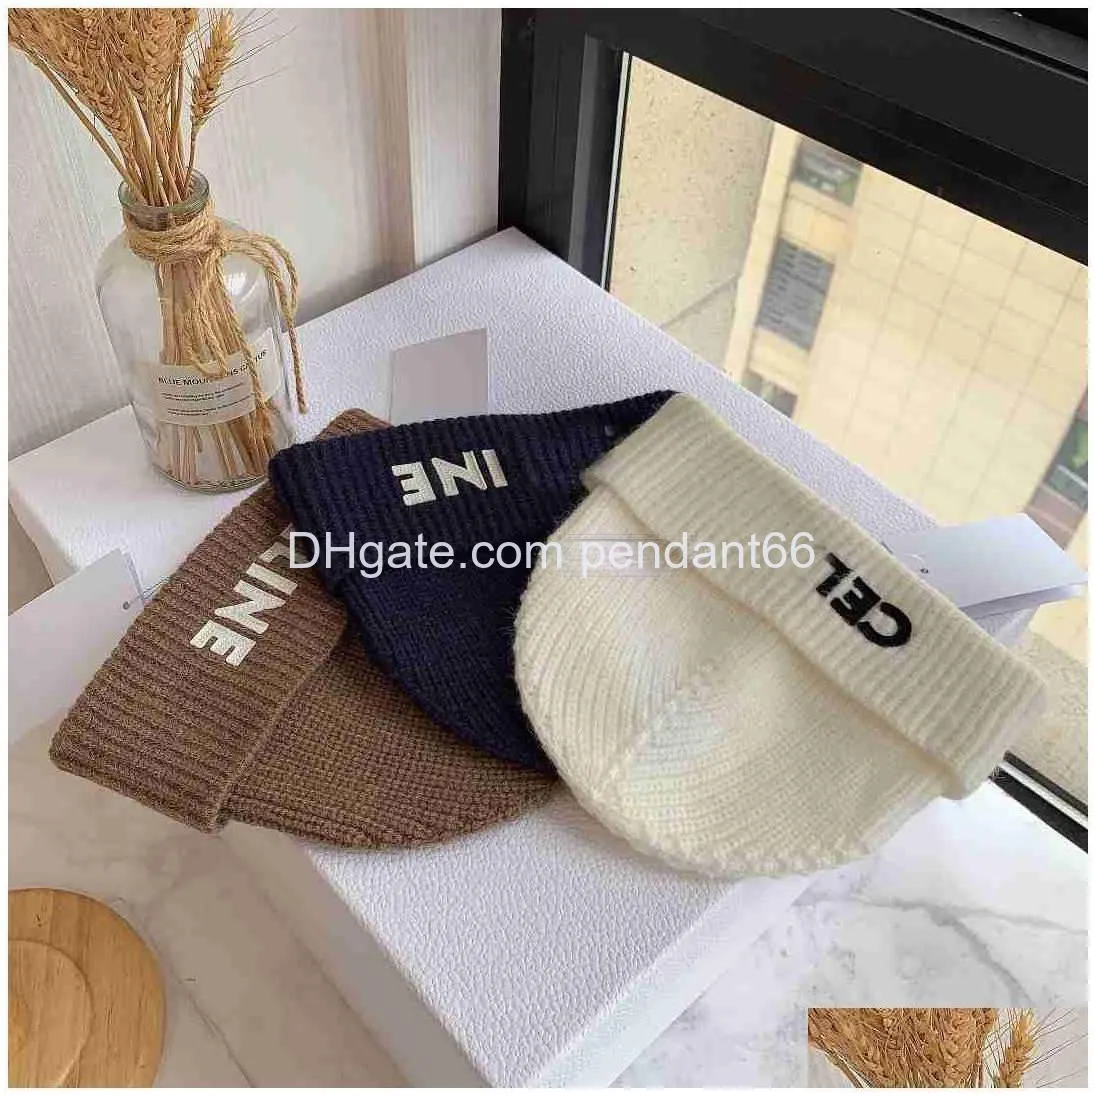 skull caps for women casual windproof wool warm fashion knitted hat designer letter ce solid christmas hats 22ss winter